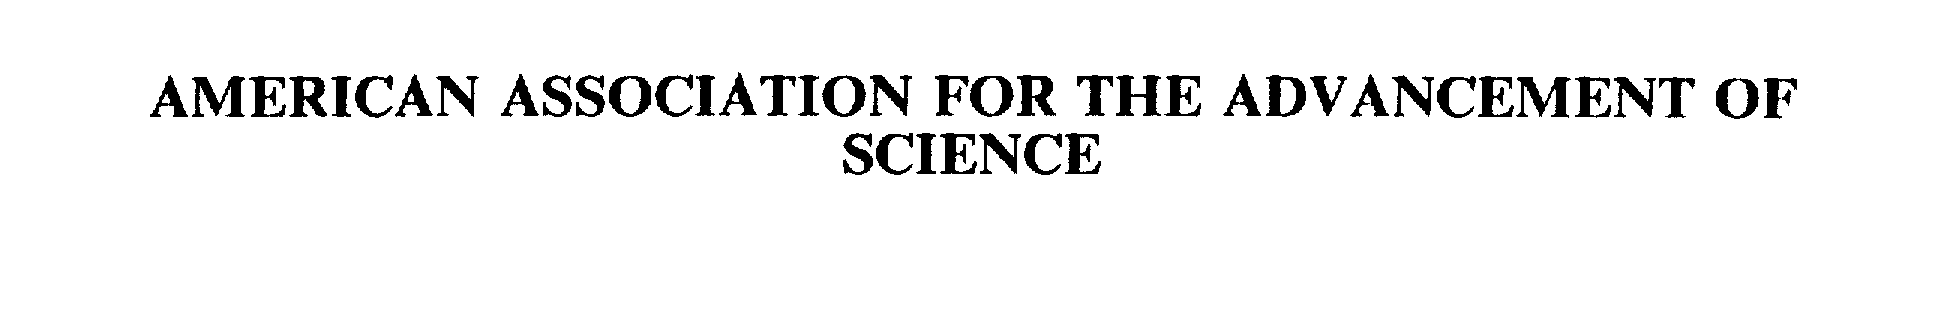 Trademark Logo AMERICAN ASSOCIATION FOR THE ADVANCEMENT OF SCIENCE